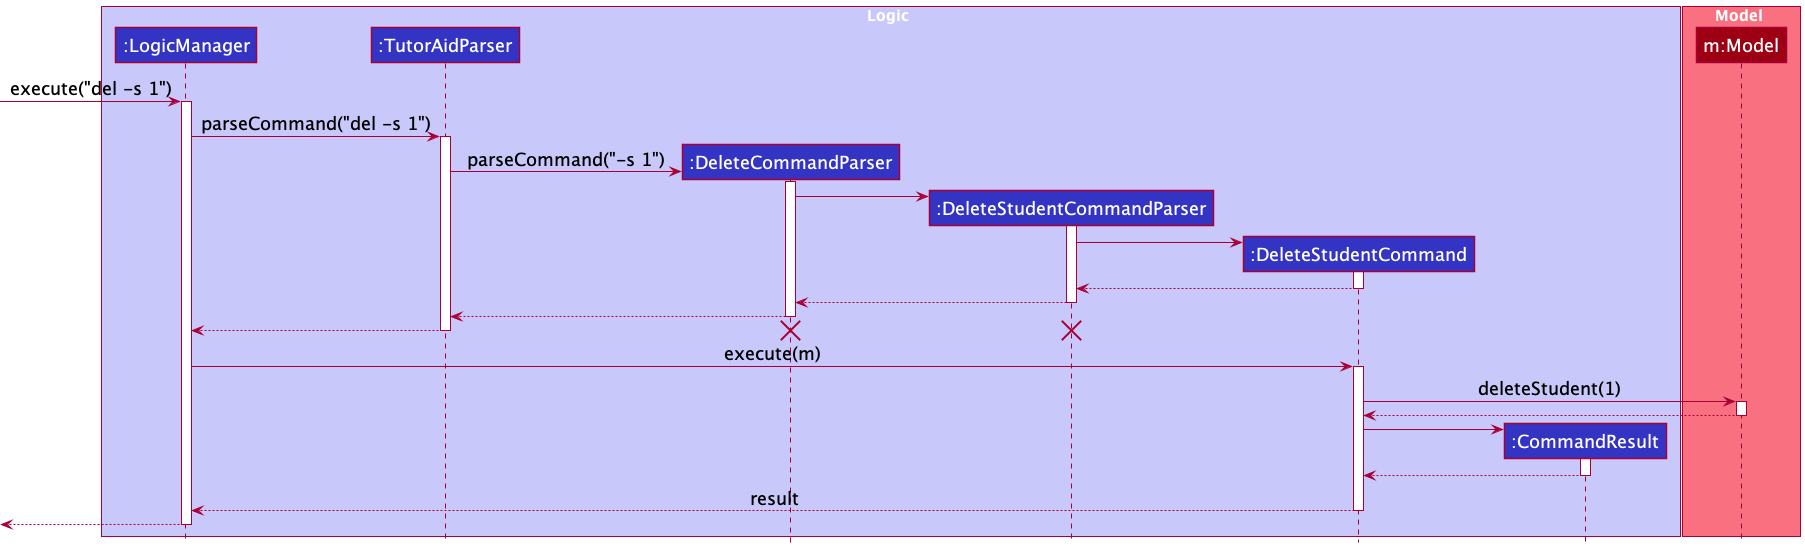 Interactions Inside the Logic Component for the `del -s 1` Command